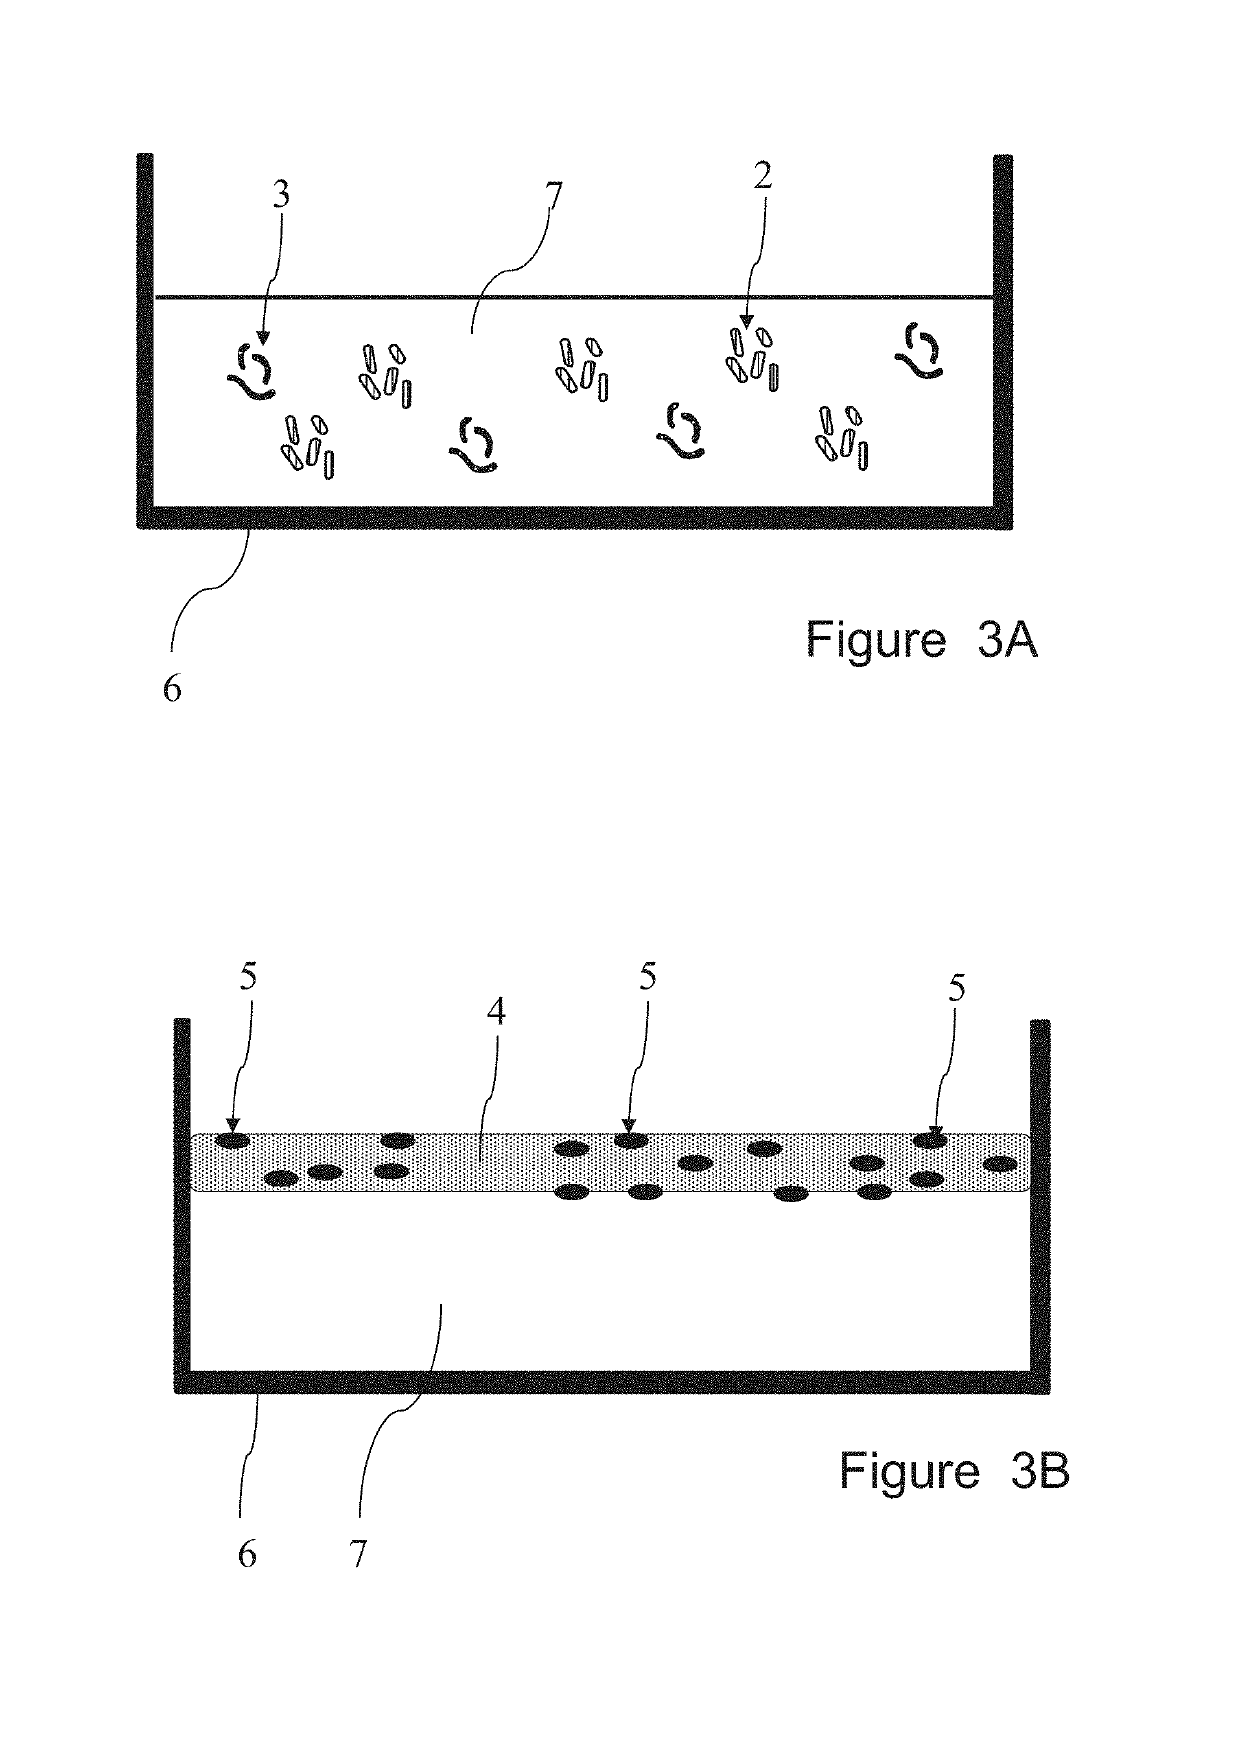 Process for preparing a dyed biopolymer and products thereof